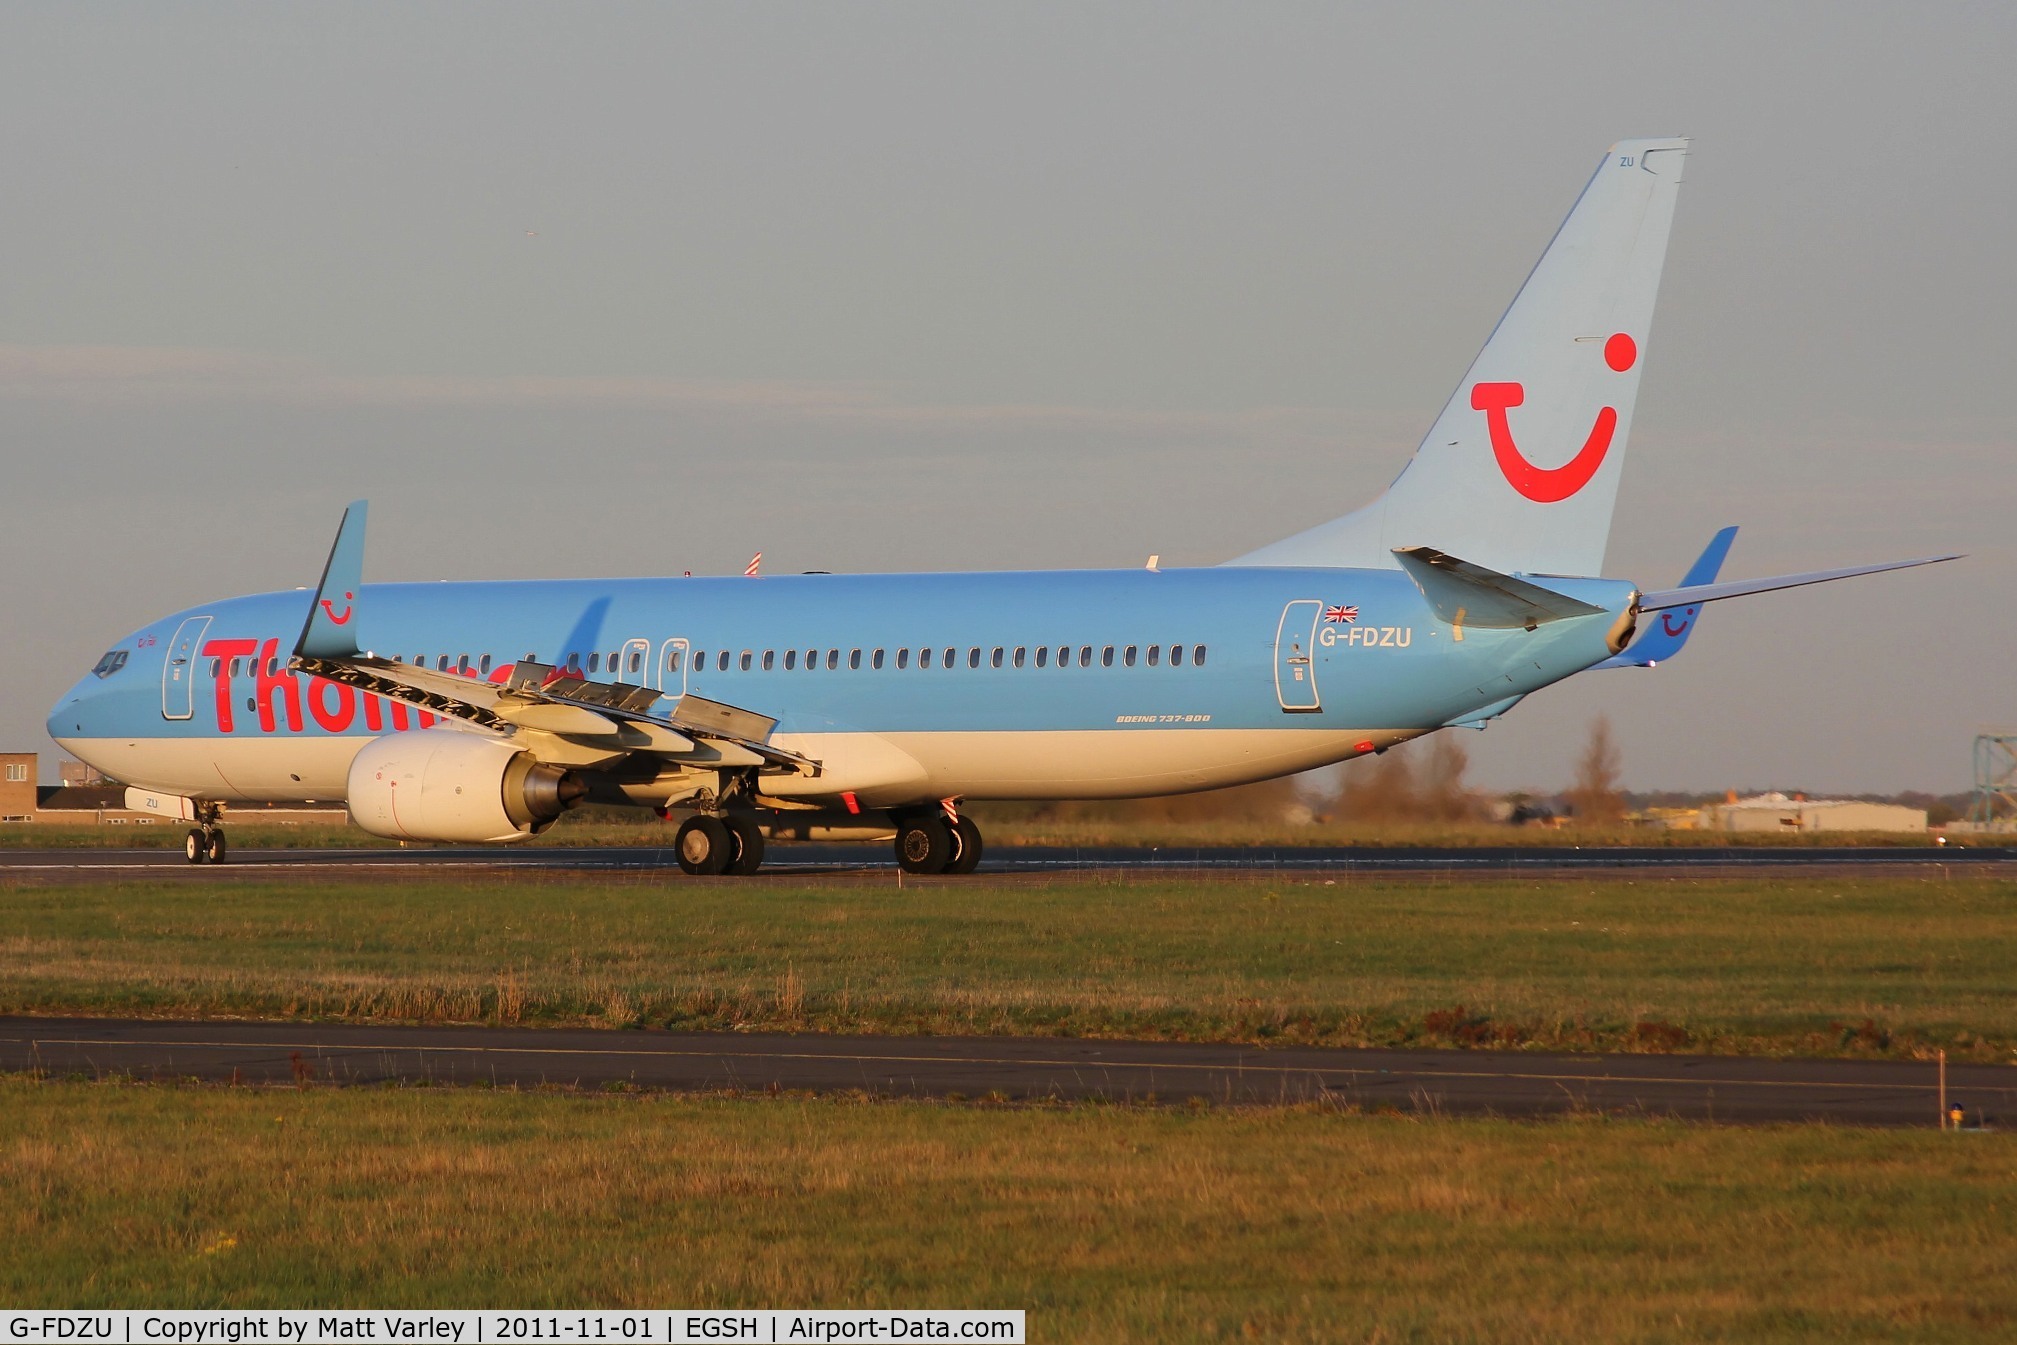 G-FDZU, 2011 Boeing 737-8K5 C/N 37253, Arriving at EGSH in the late evening sun.